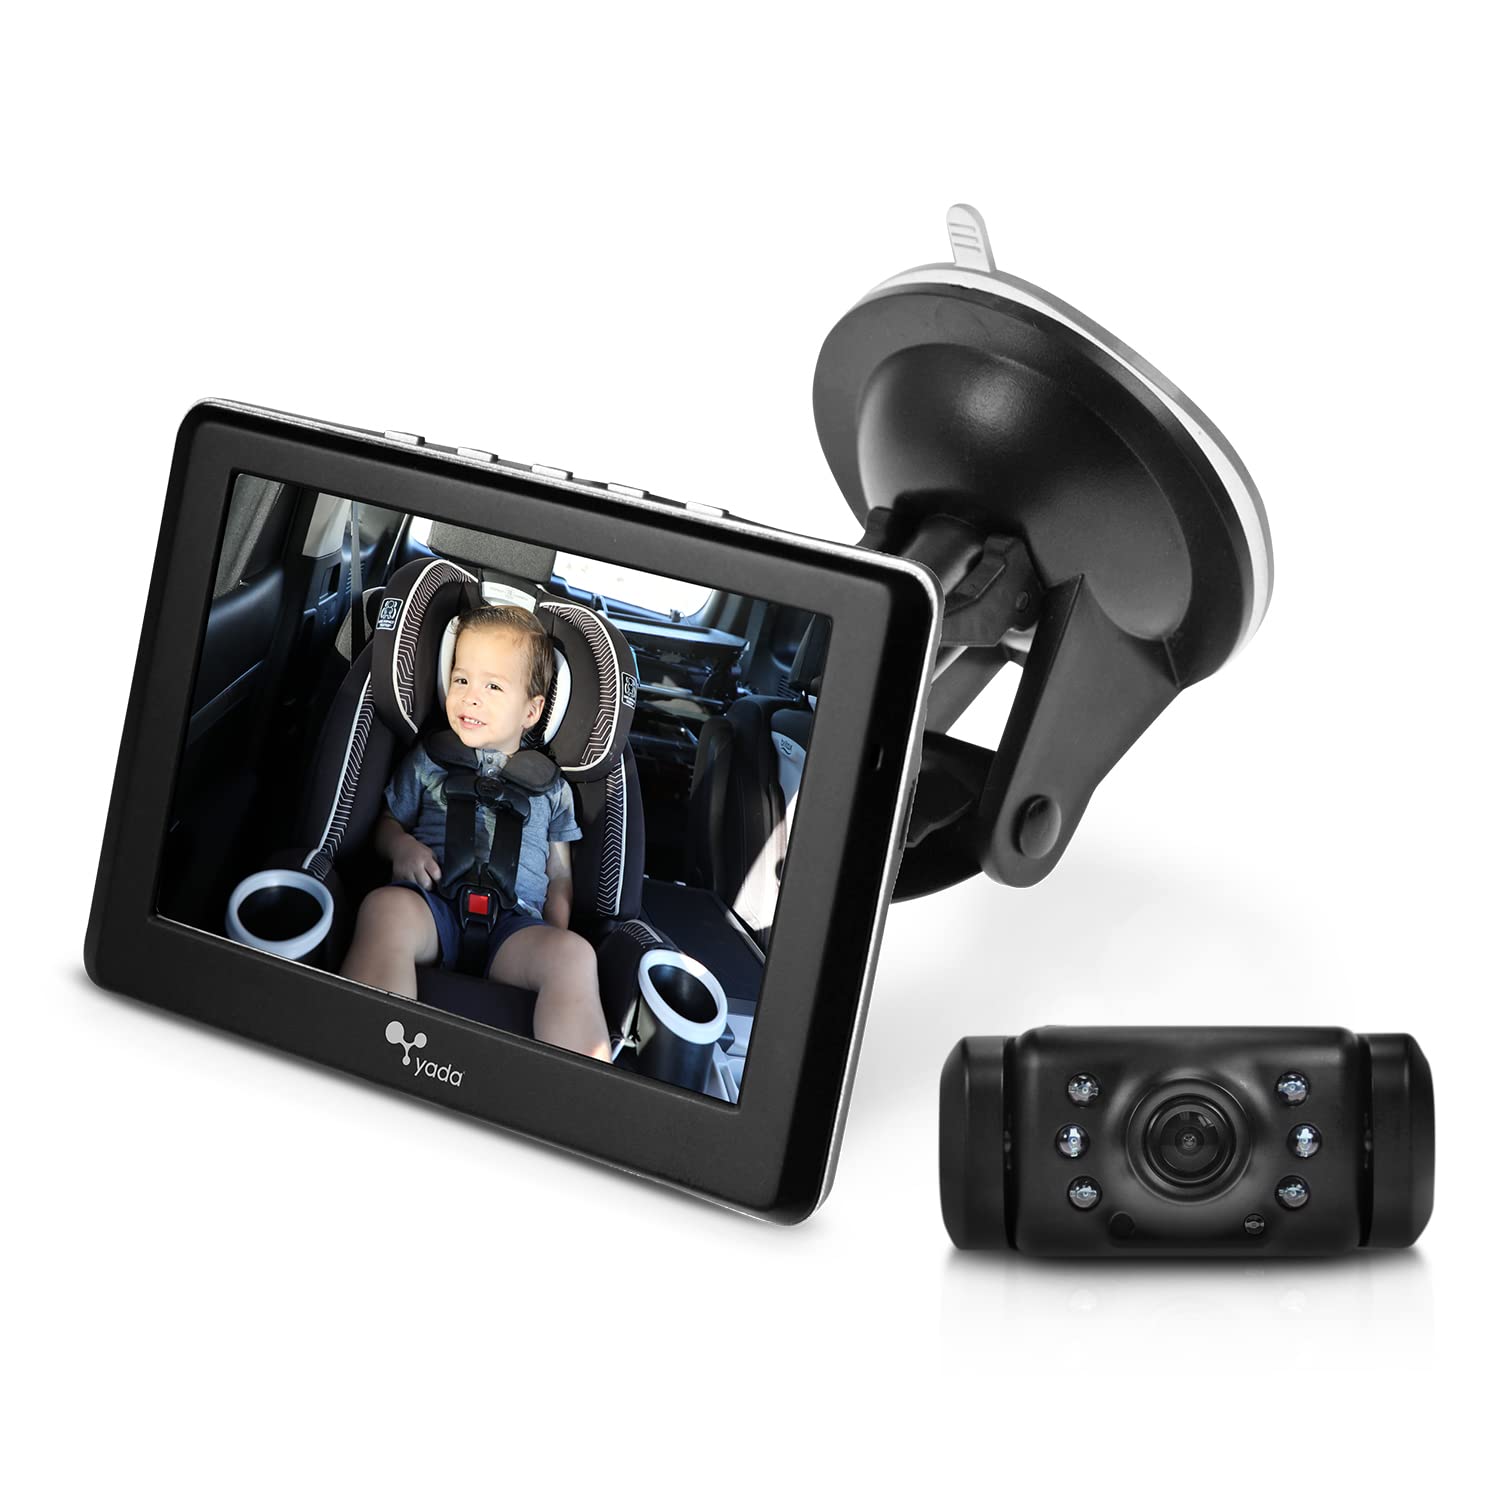 Yada car Portable Baby Monitor with Night Vision cam, Wireless Transmission, Universally compatible, 43A Digital Display, Mounts